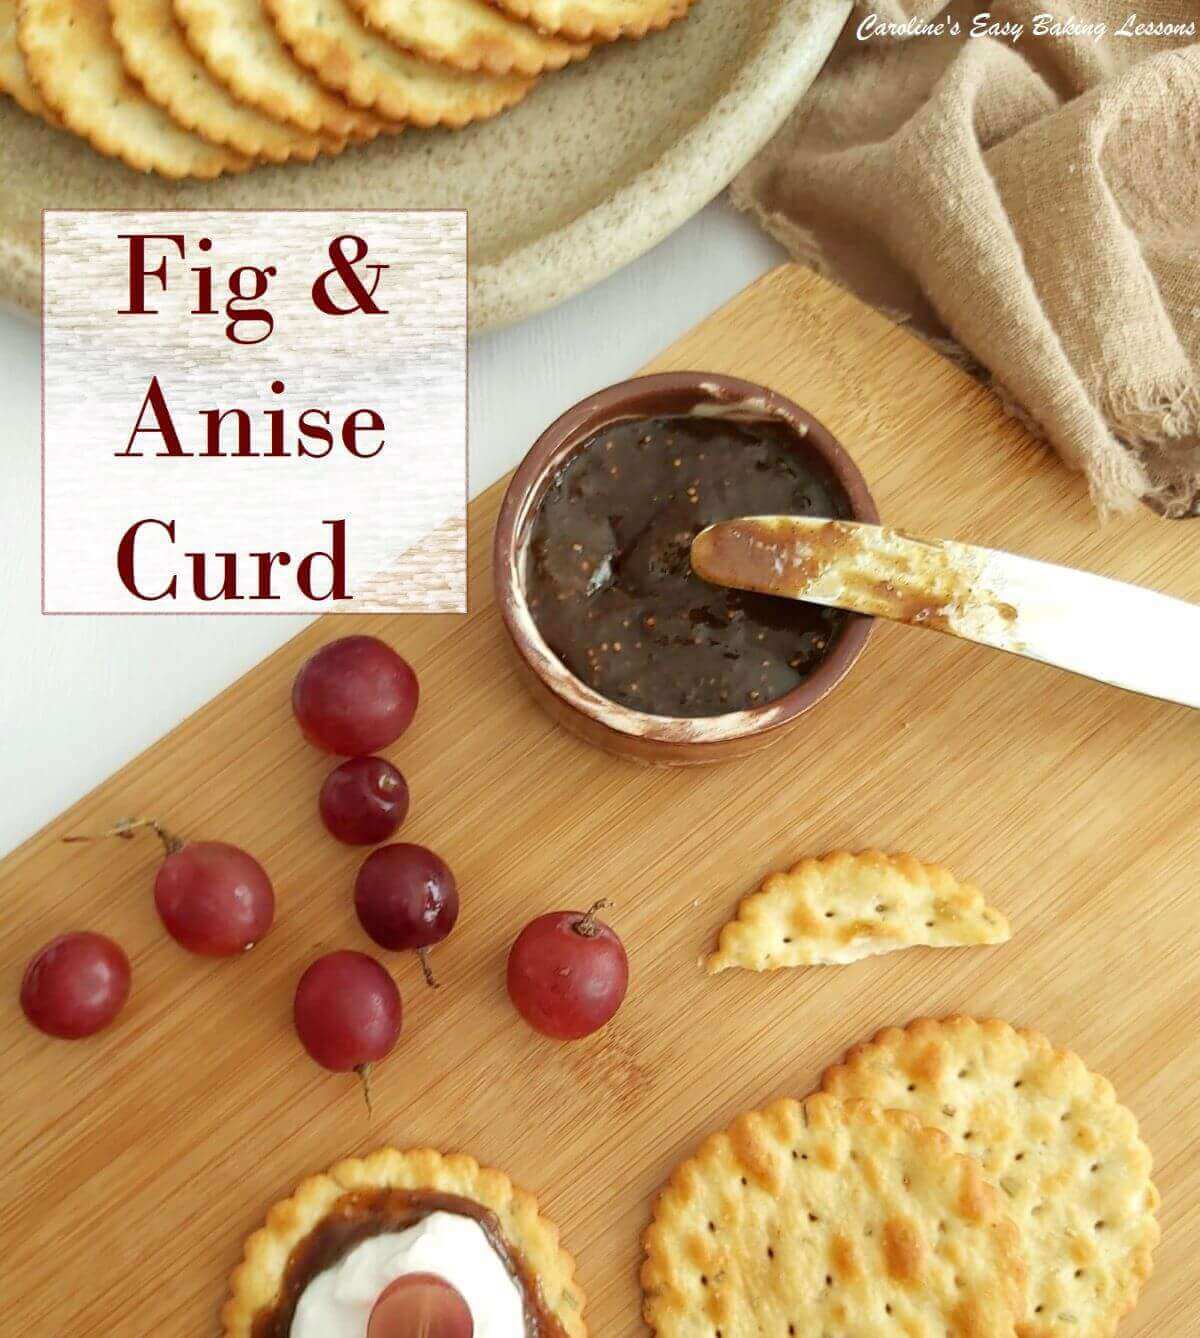 Overhead of wooden chopping board, crackers, red grapes, brown fig curd and on crackers and white cheese with fig anise curd title.